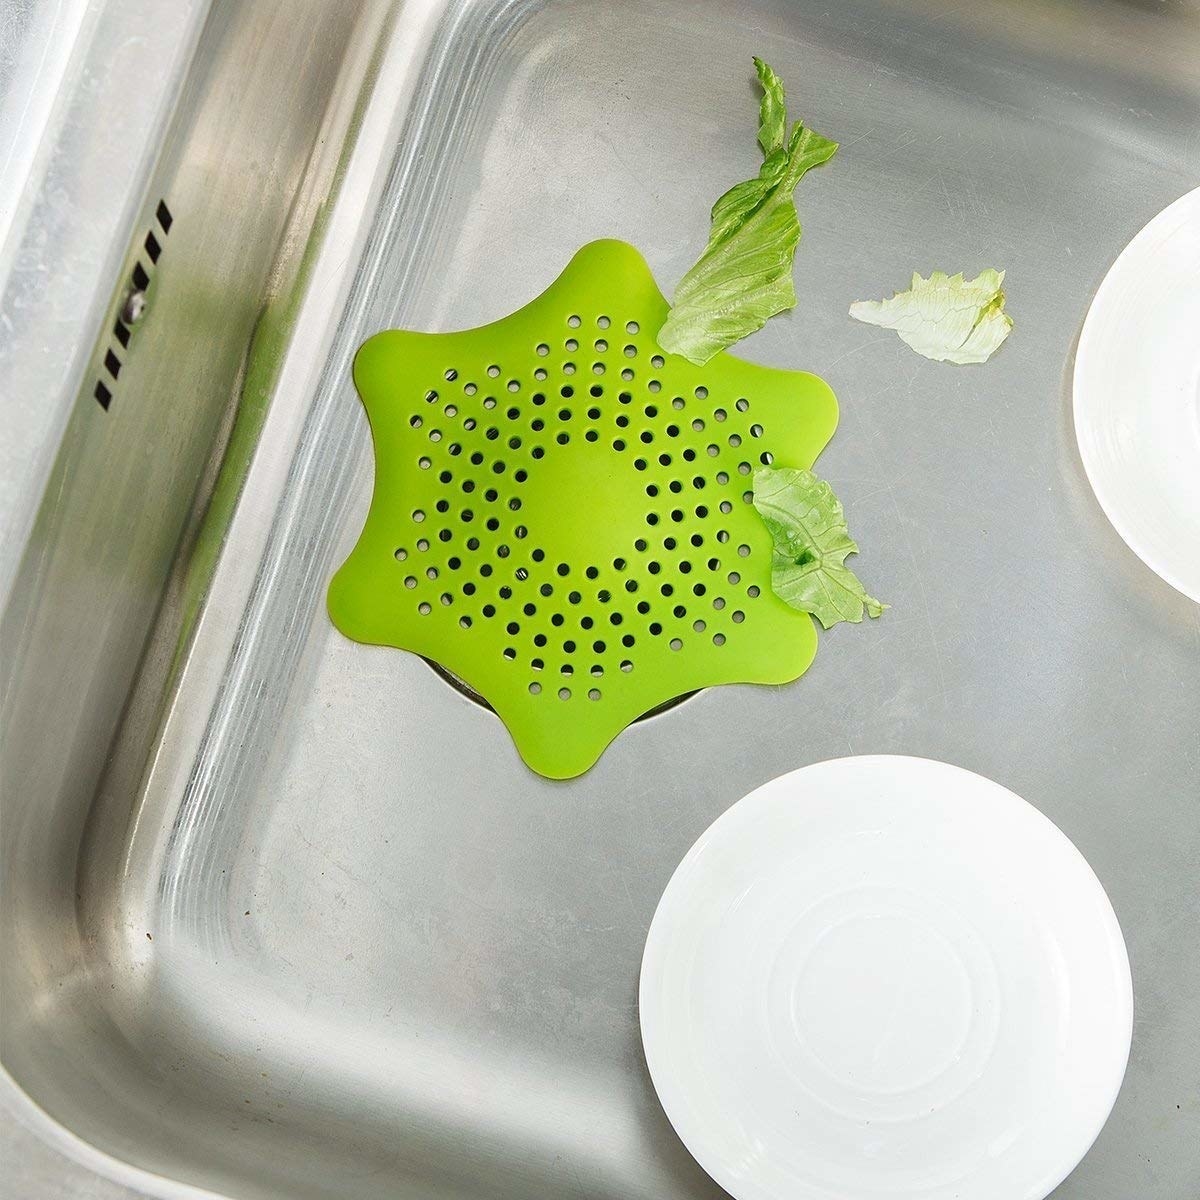 The drain stopper filtering out bits of lettuce in the sink.